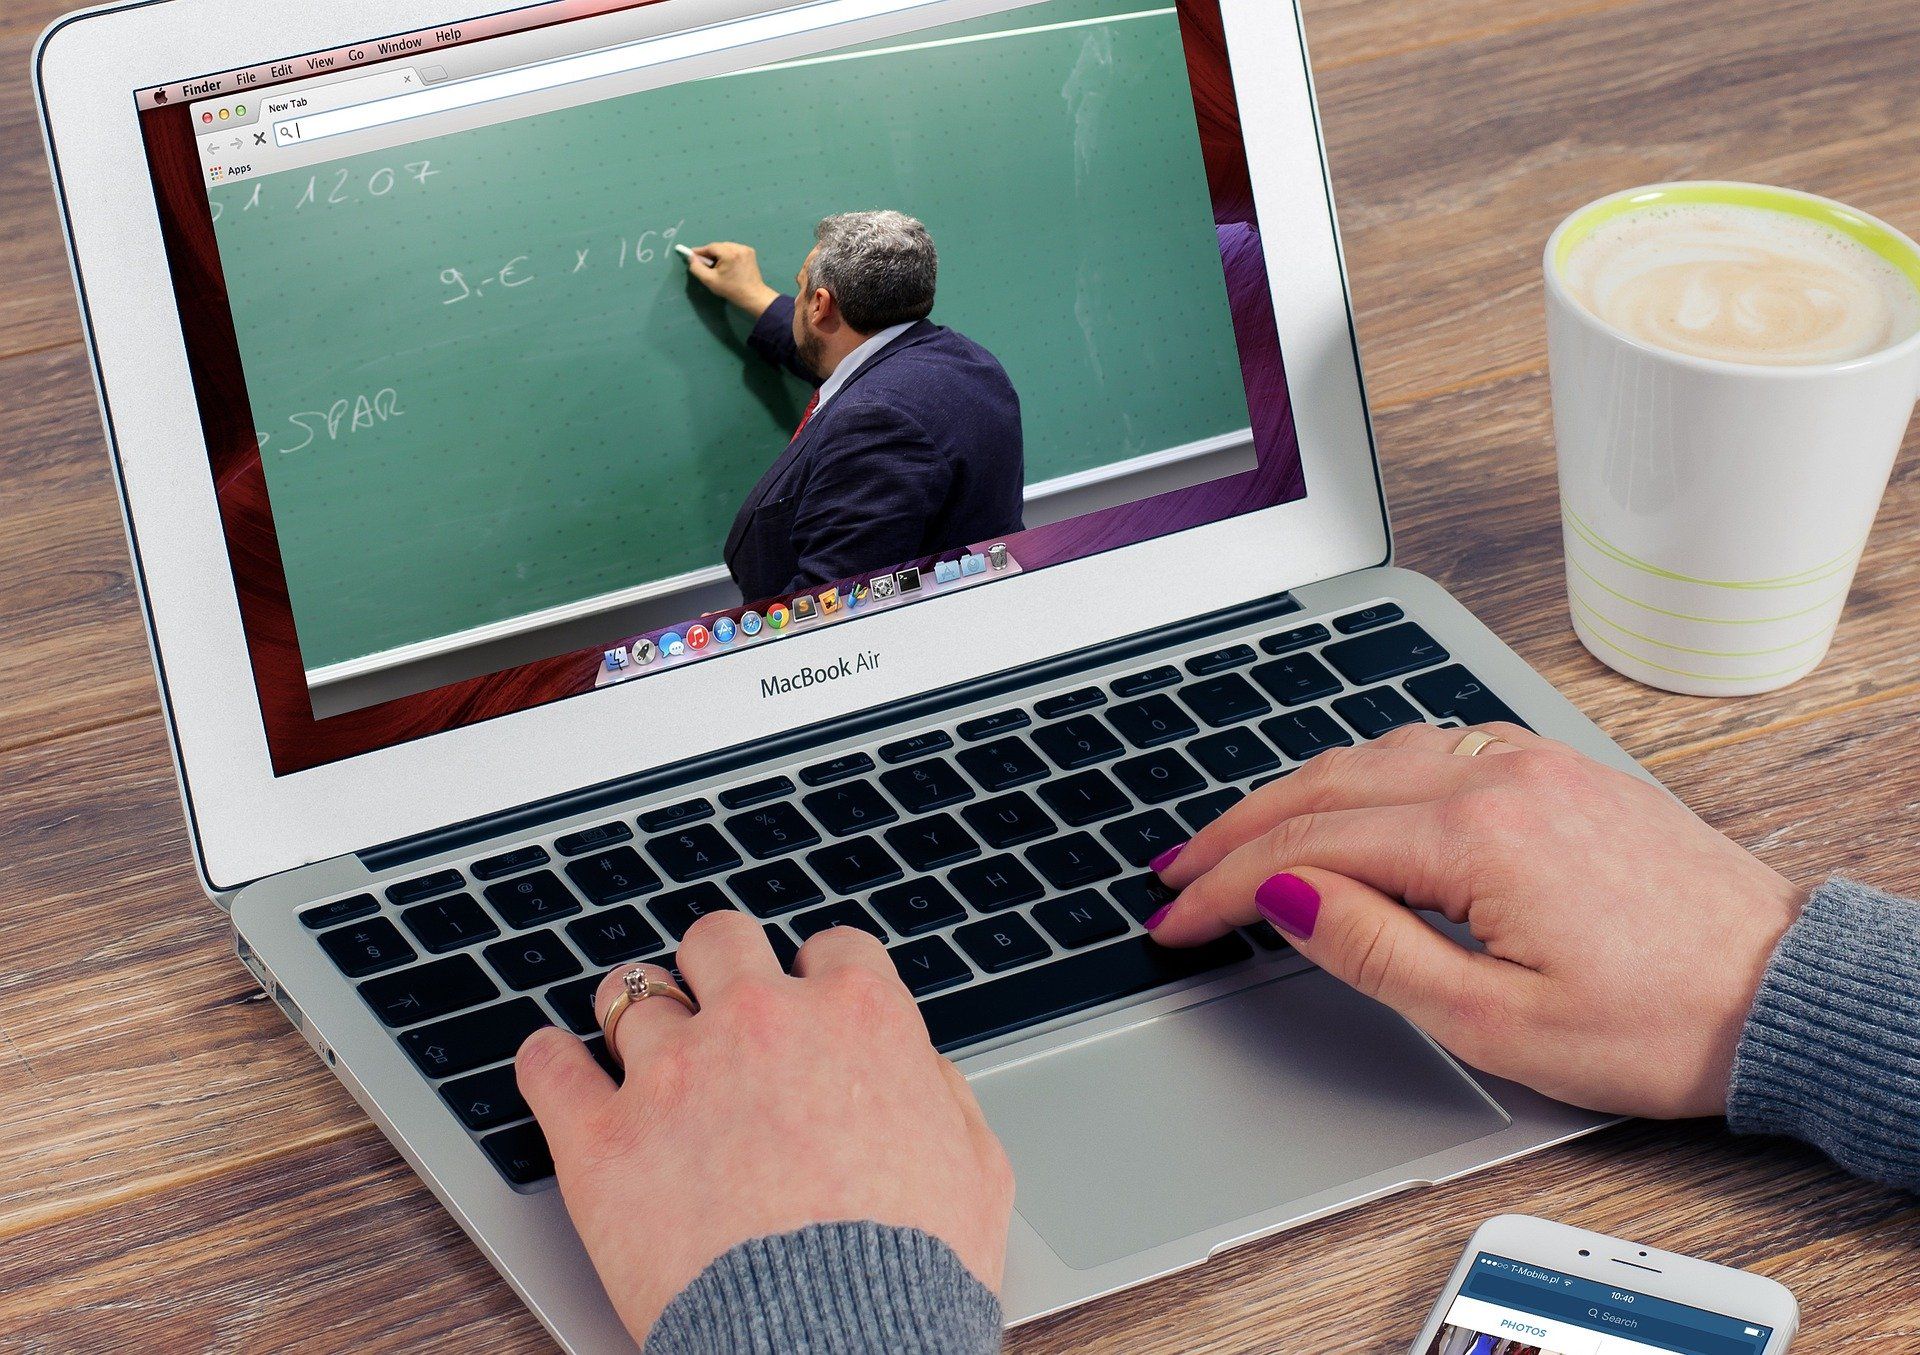 Less interaction, technical issues: Teachers face challenges as classes shift online